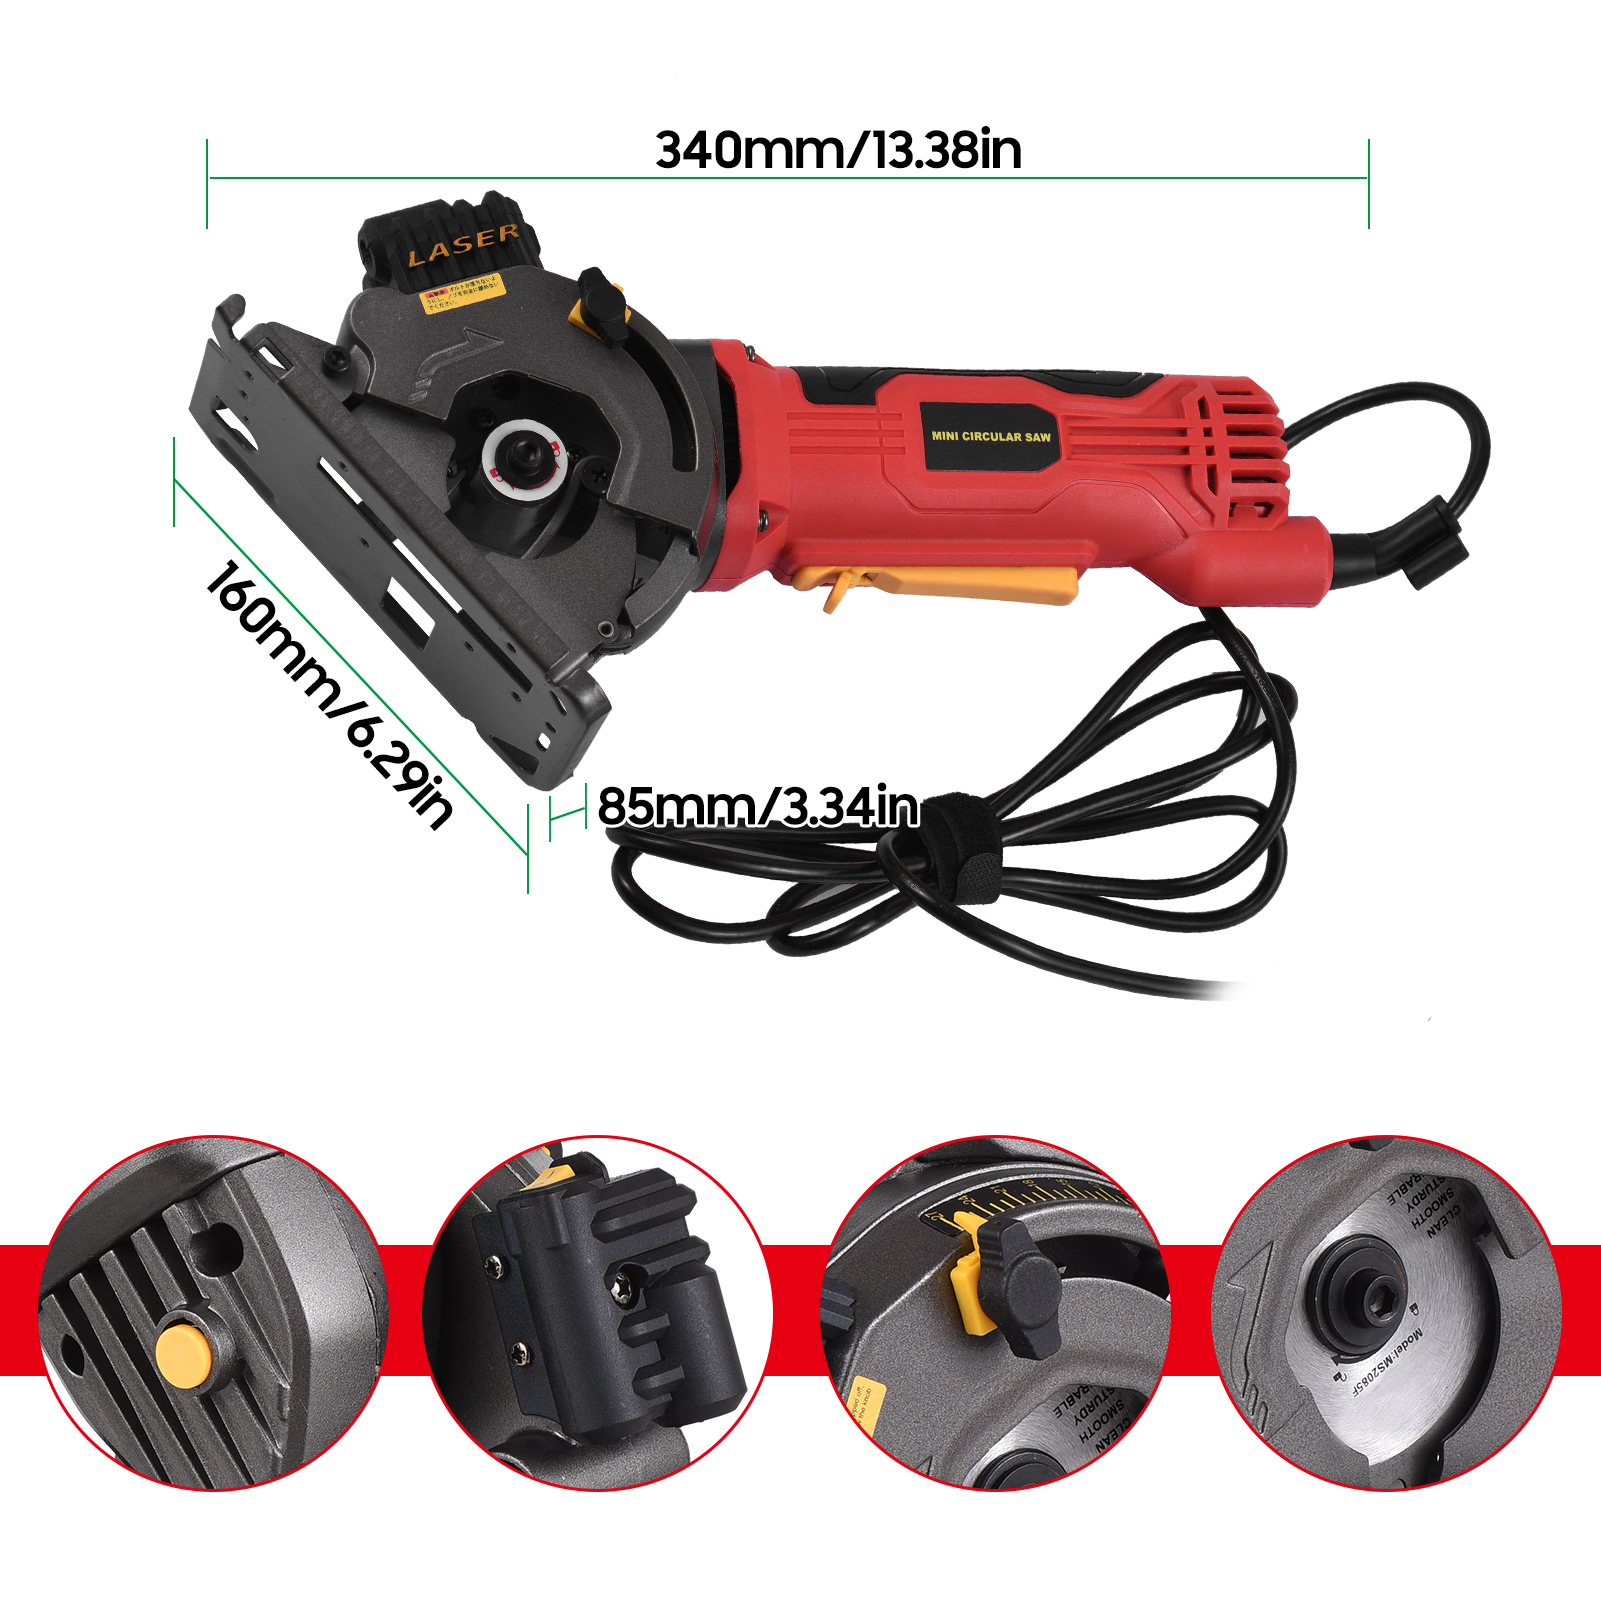 Walmeck 480W 3700RPM Circular Saw Corded Amp Electric Compact Circular Saw  with Guide Scale Ruler Port for Cutting Wood Tile Soft Metal